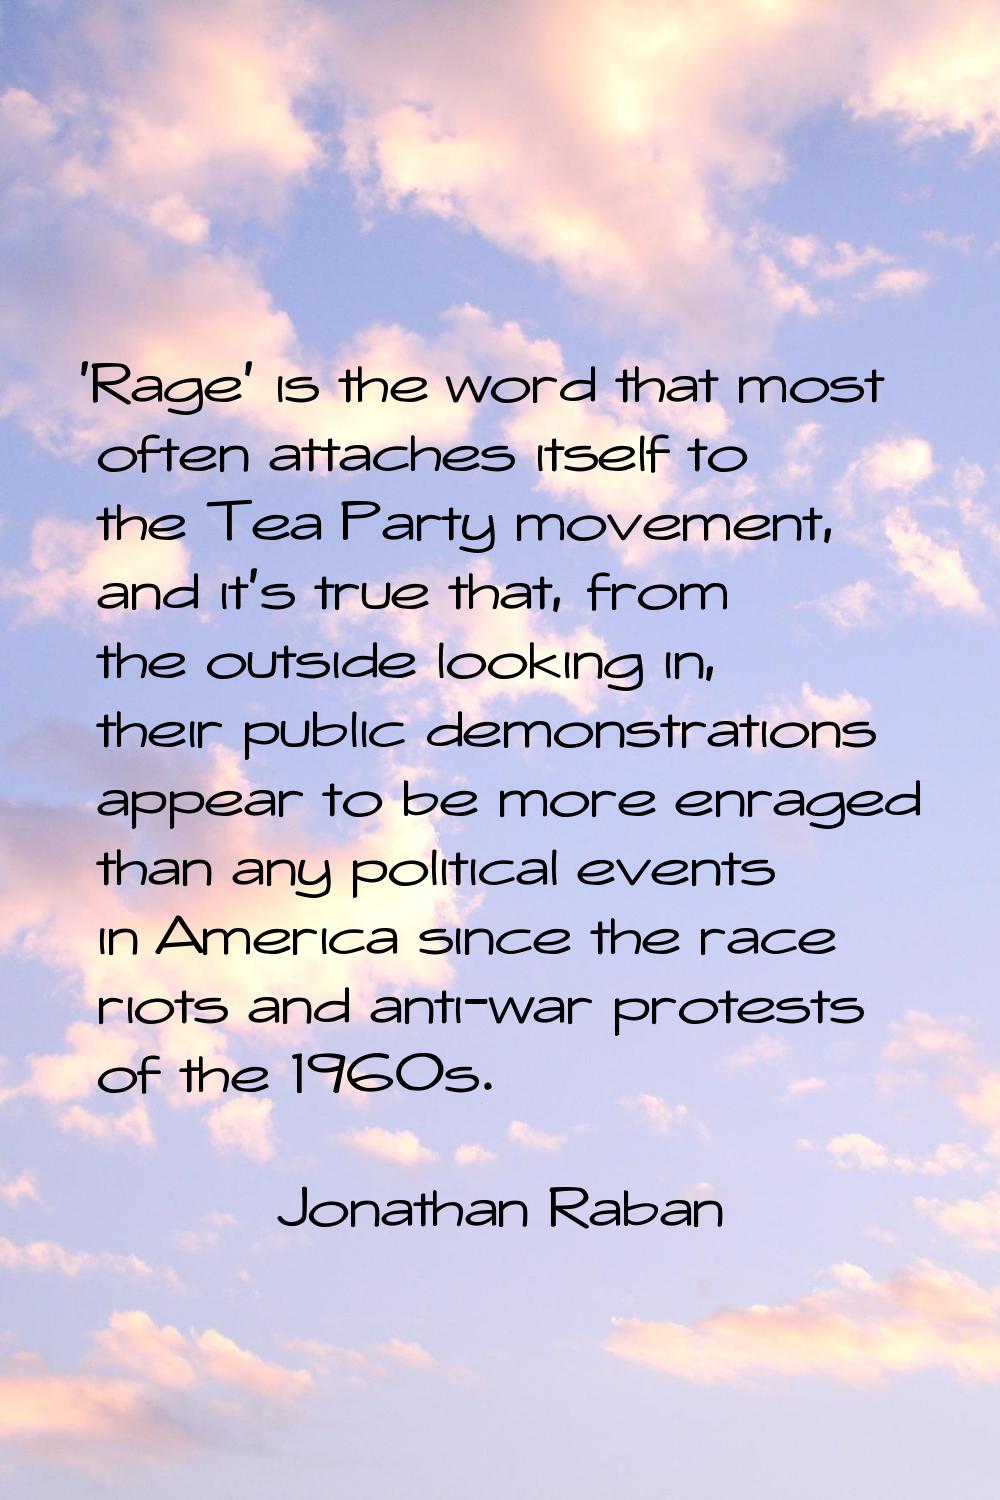 'Rage' is the word that most often attaches itself to the Tea Party movement, and it's true that, f